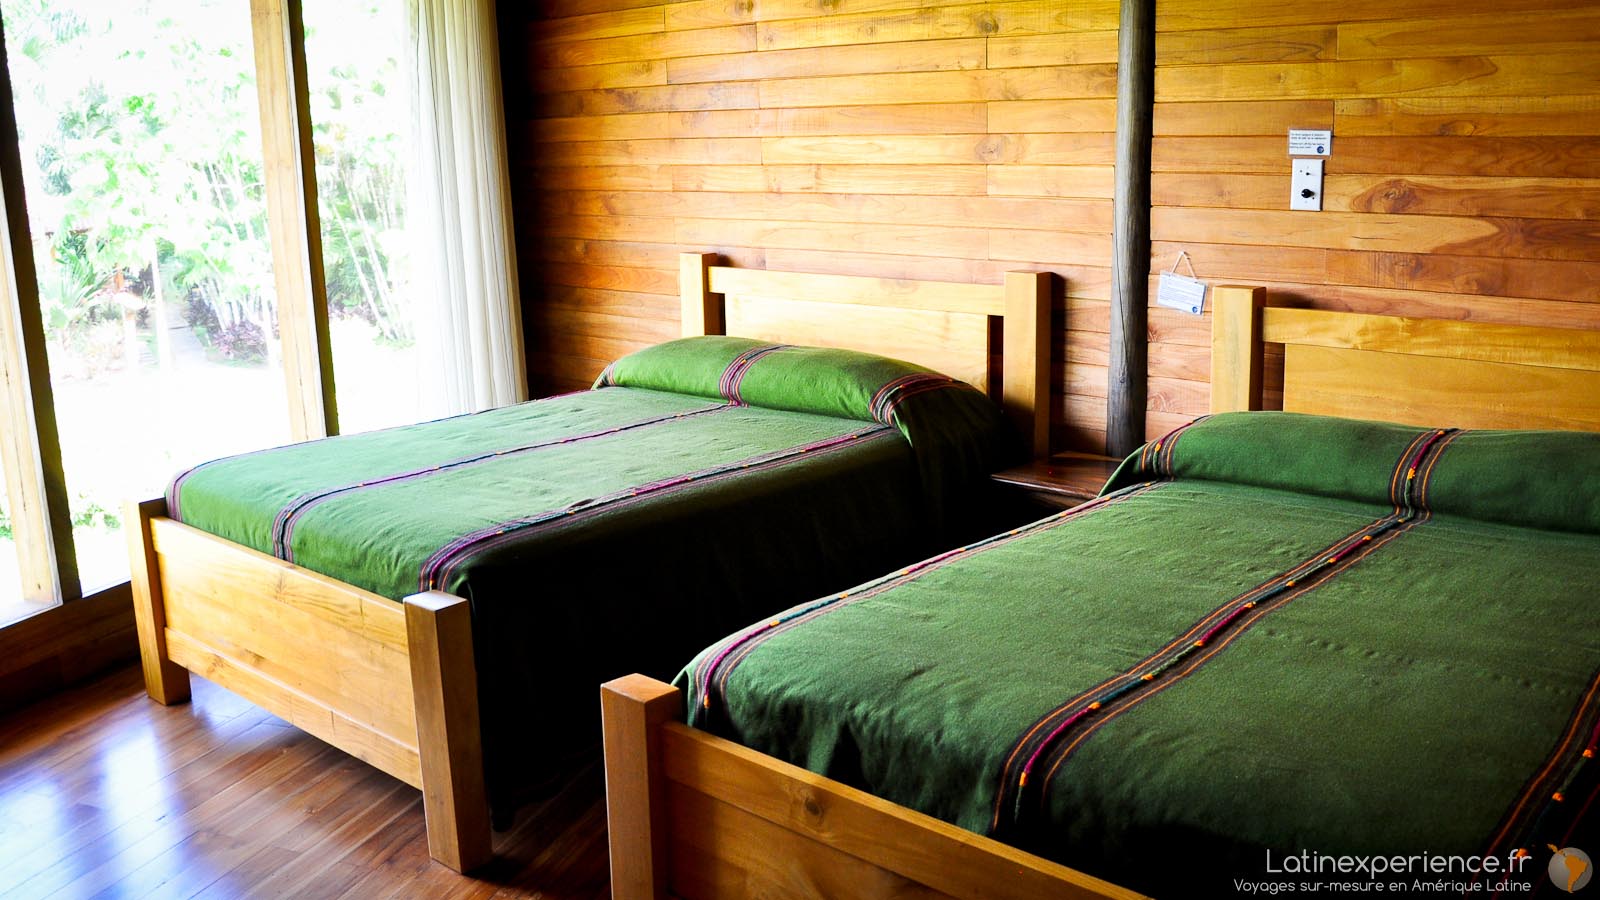 Costa Rica - Macaw Lodge - Latinexperience voyages